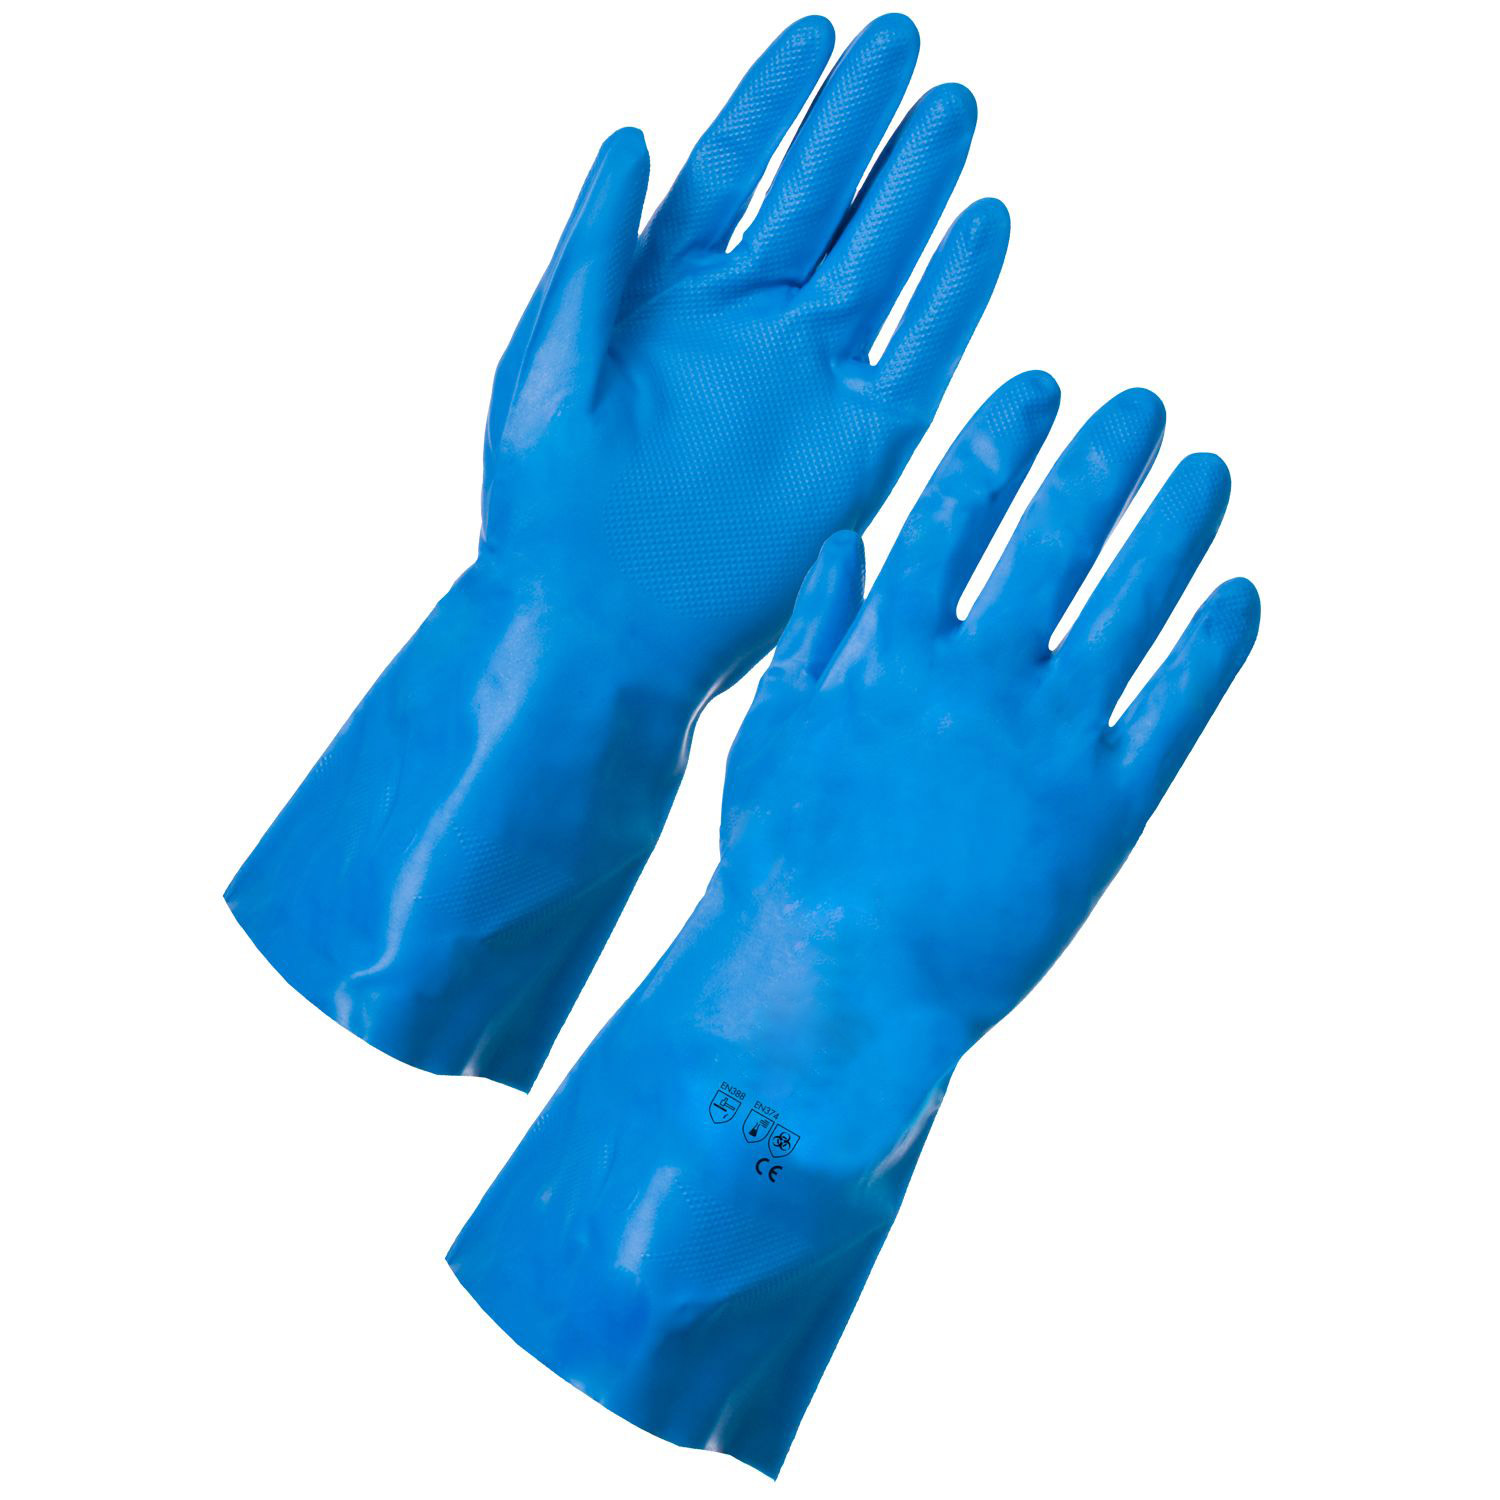 Tough Chemical Resistant Industrial Nitrile Gloves